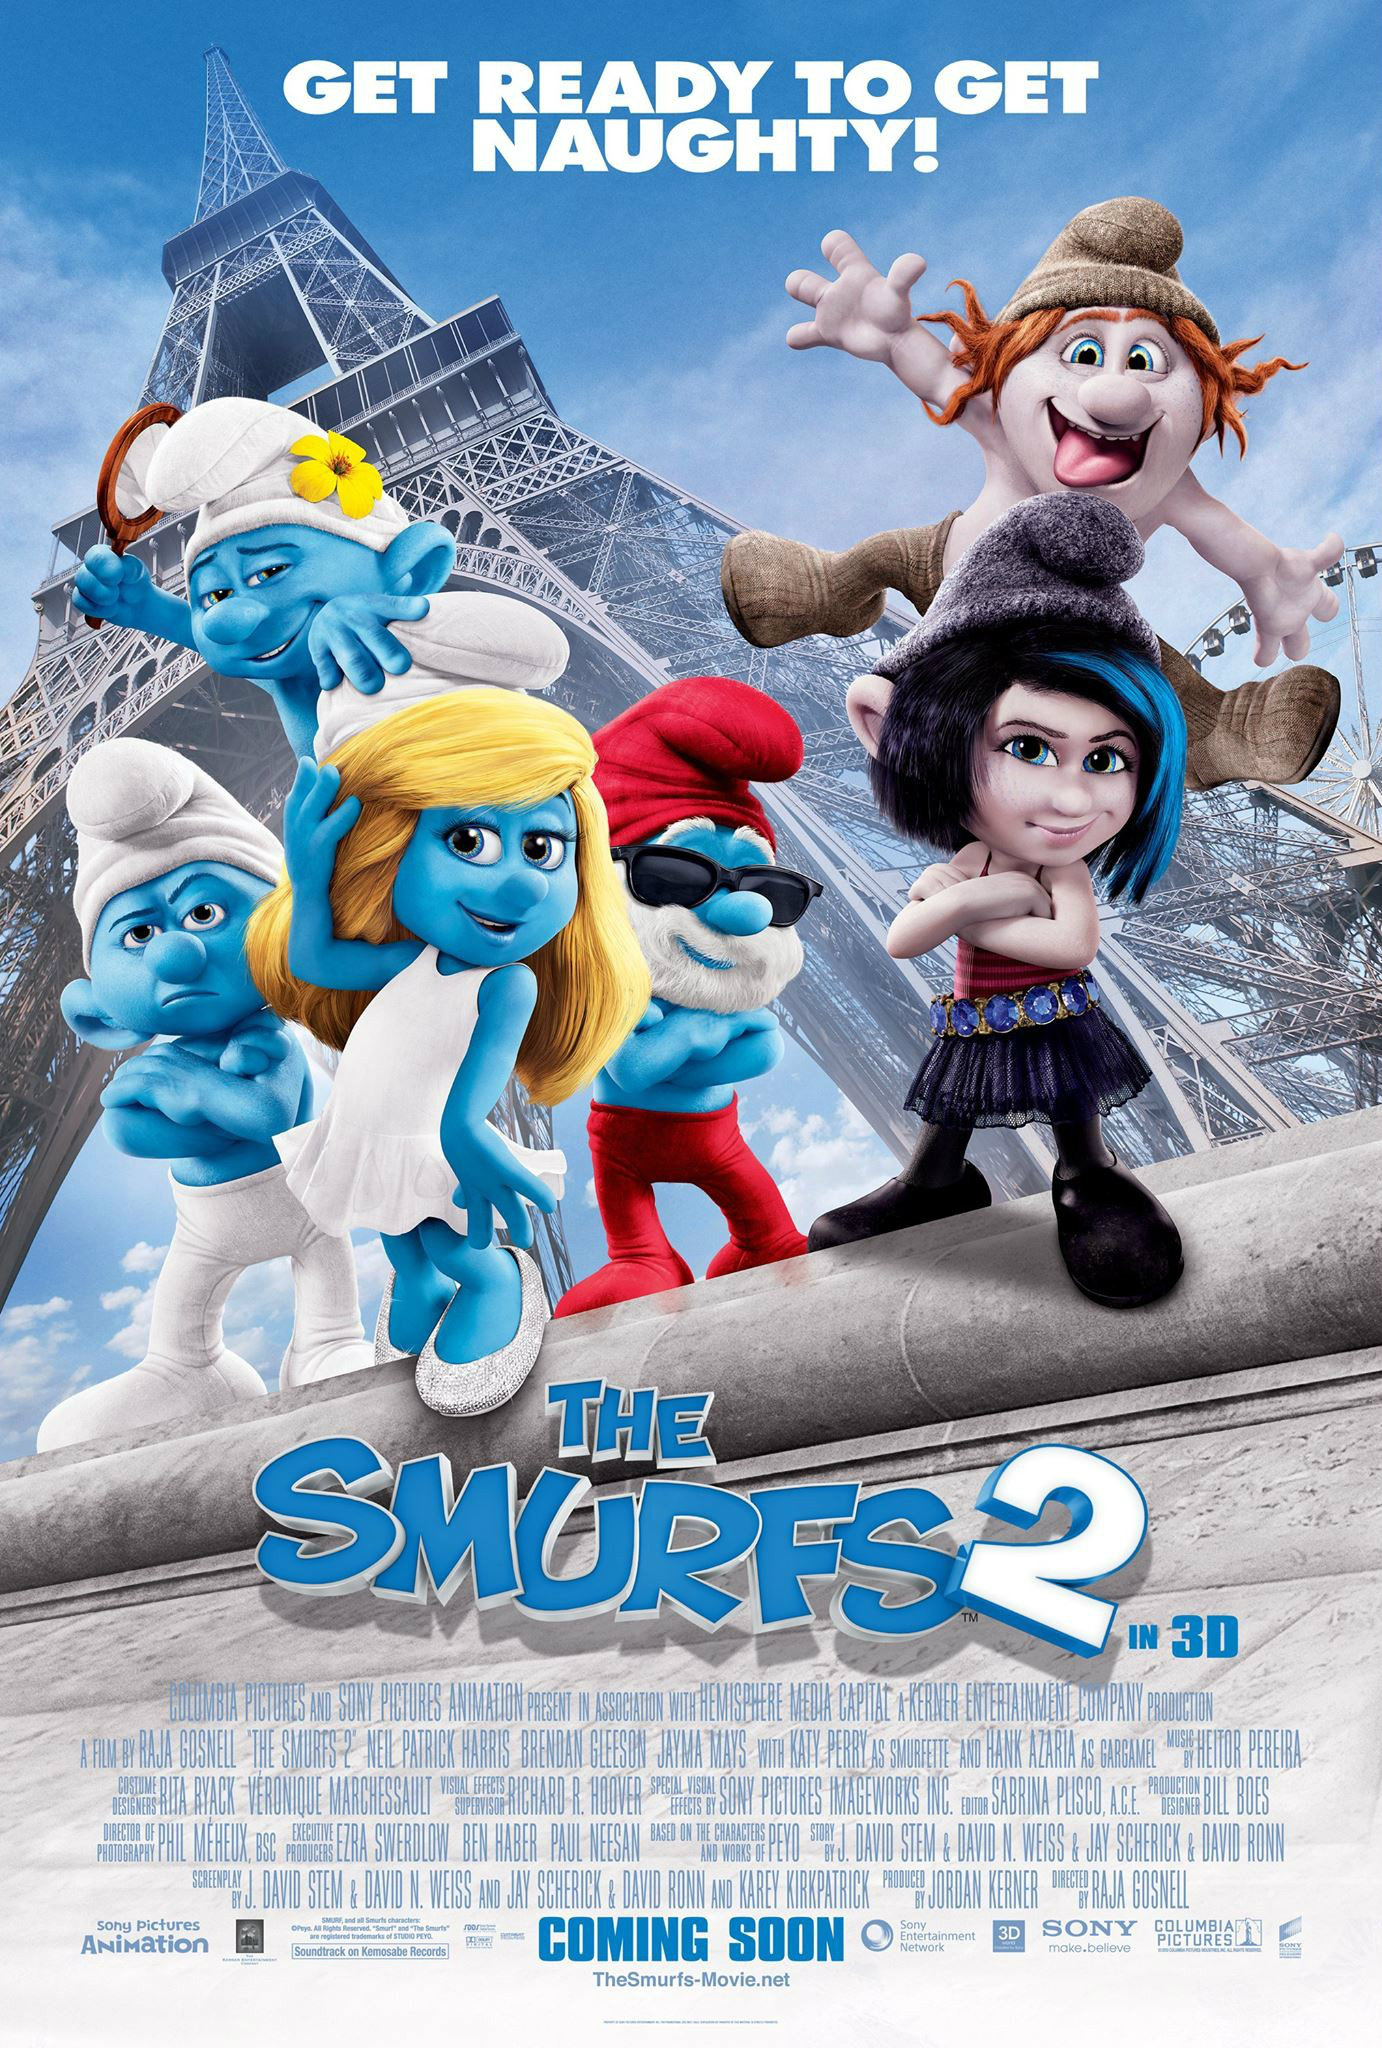 The Smurfs 2 in 3D